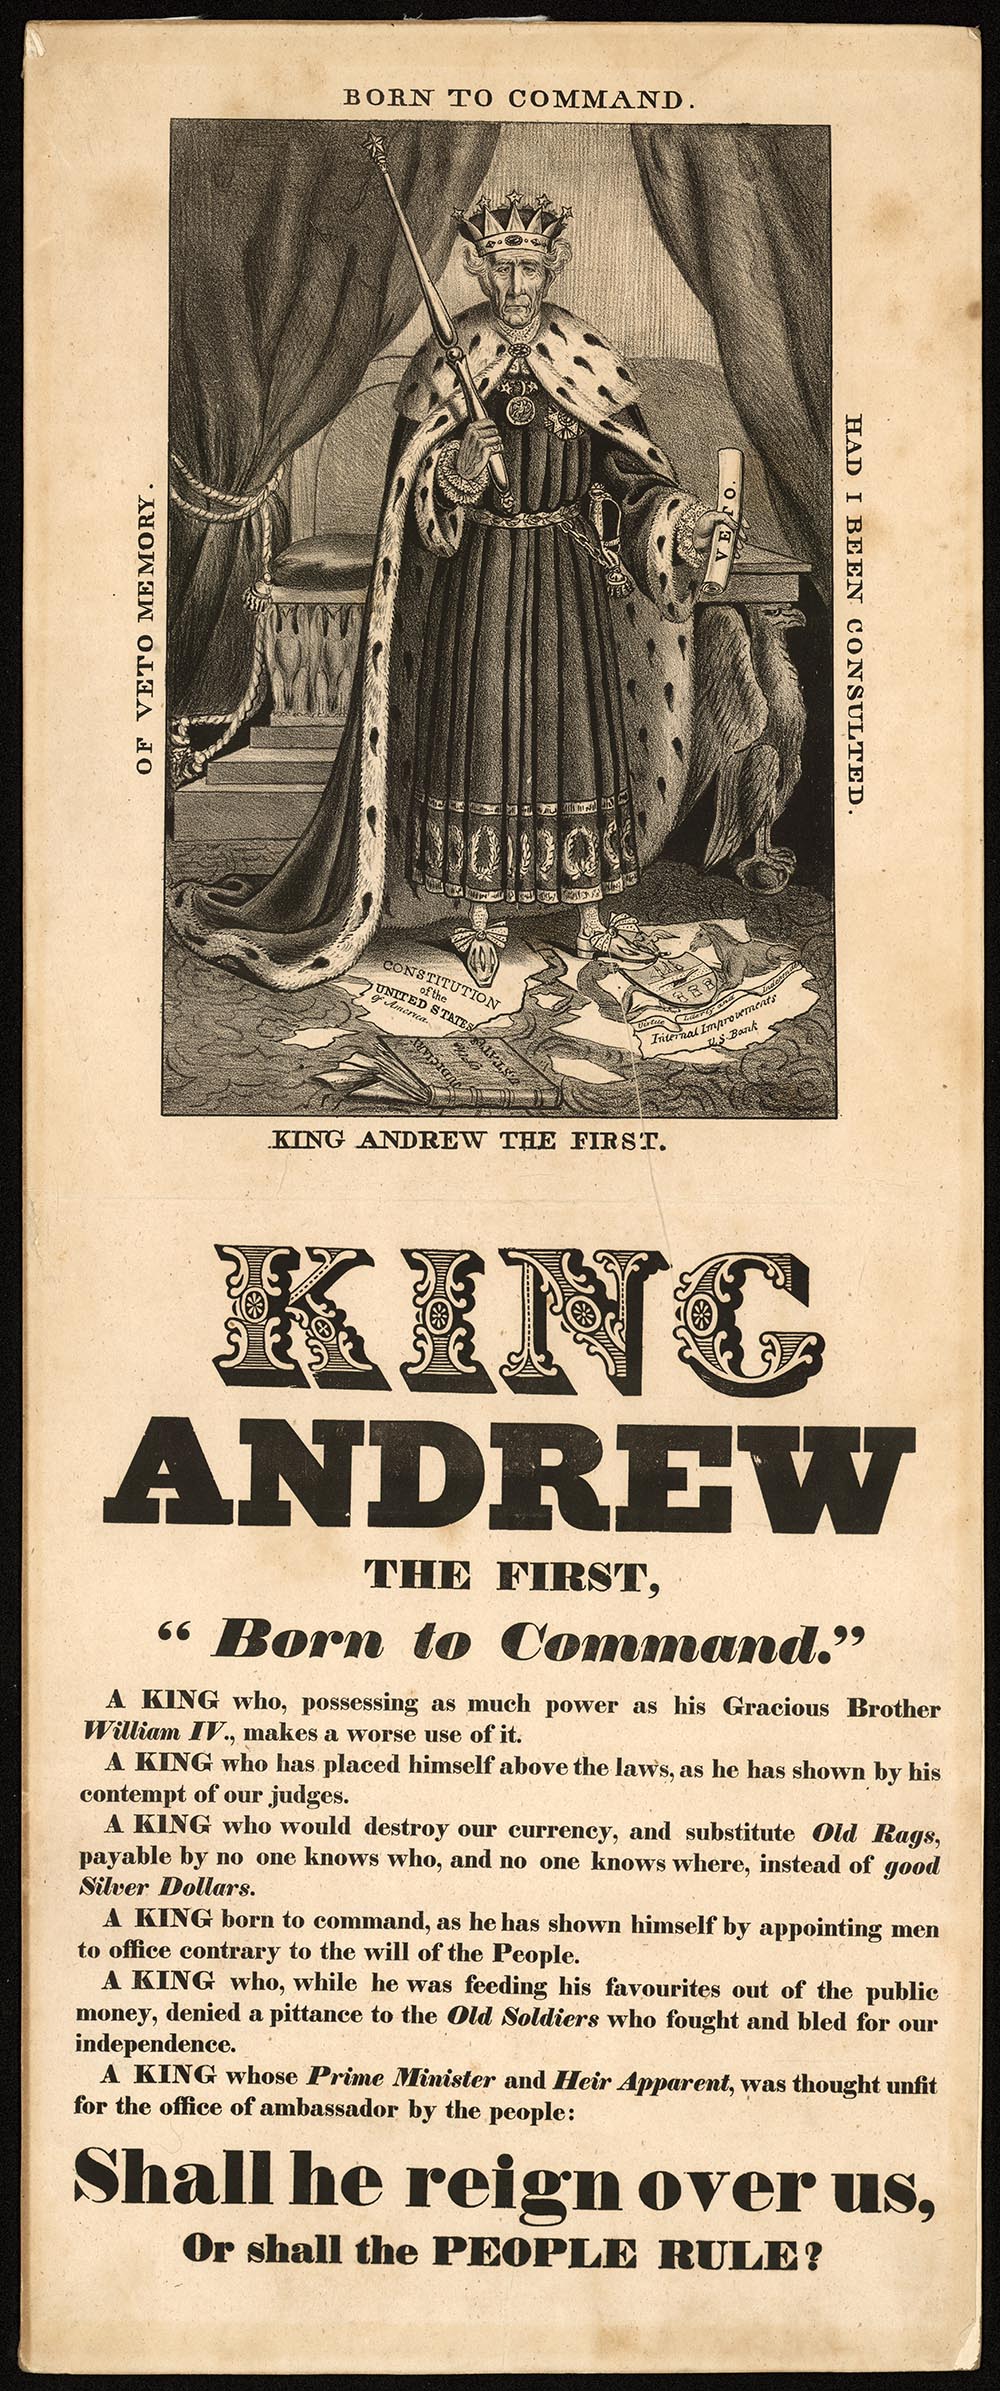 King Andrew the First, a political cartoon criticizing President Andrew Jackson